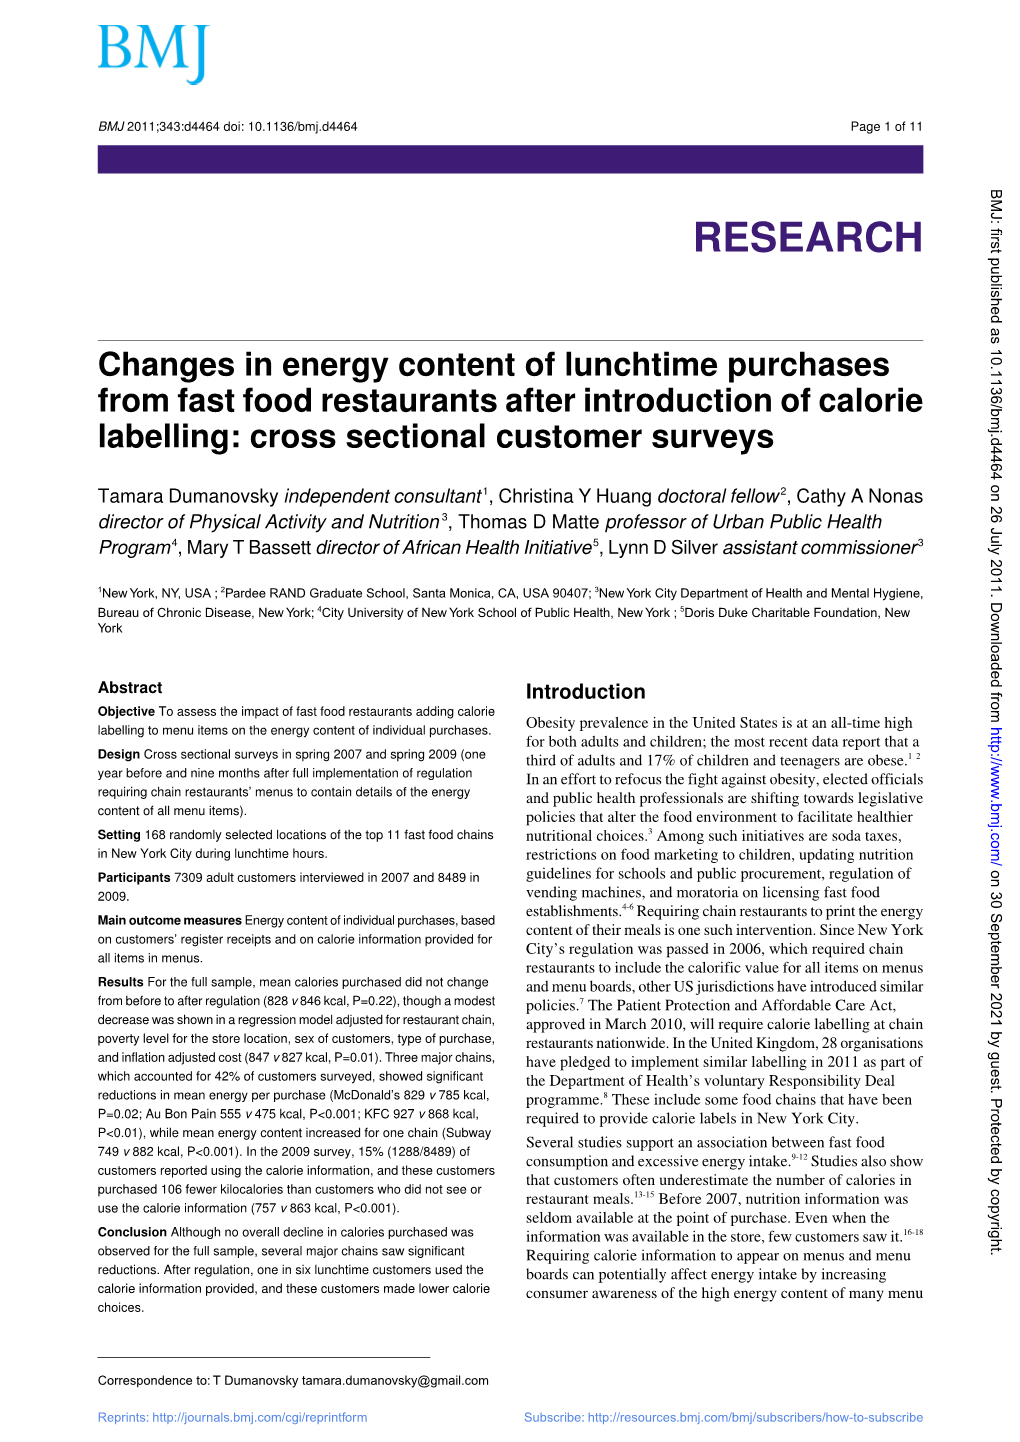 Changes in Energy Content of Lunchtime Purchases from Fast Food Restaurants After Introduction of Calorie Labelling: Cross Sectional Customer Surveys